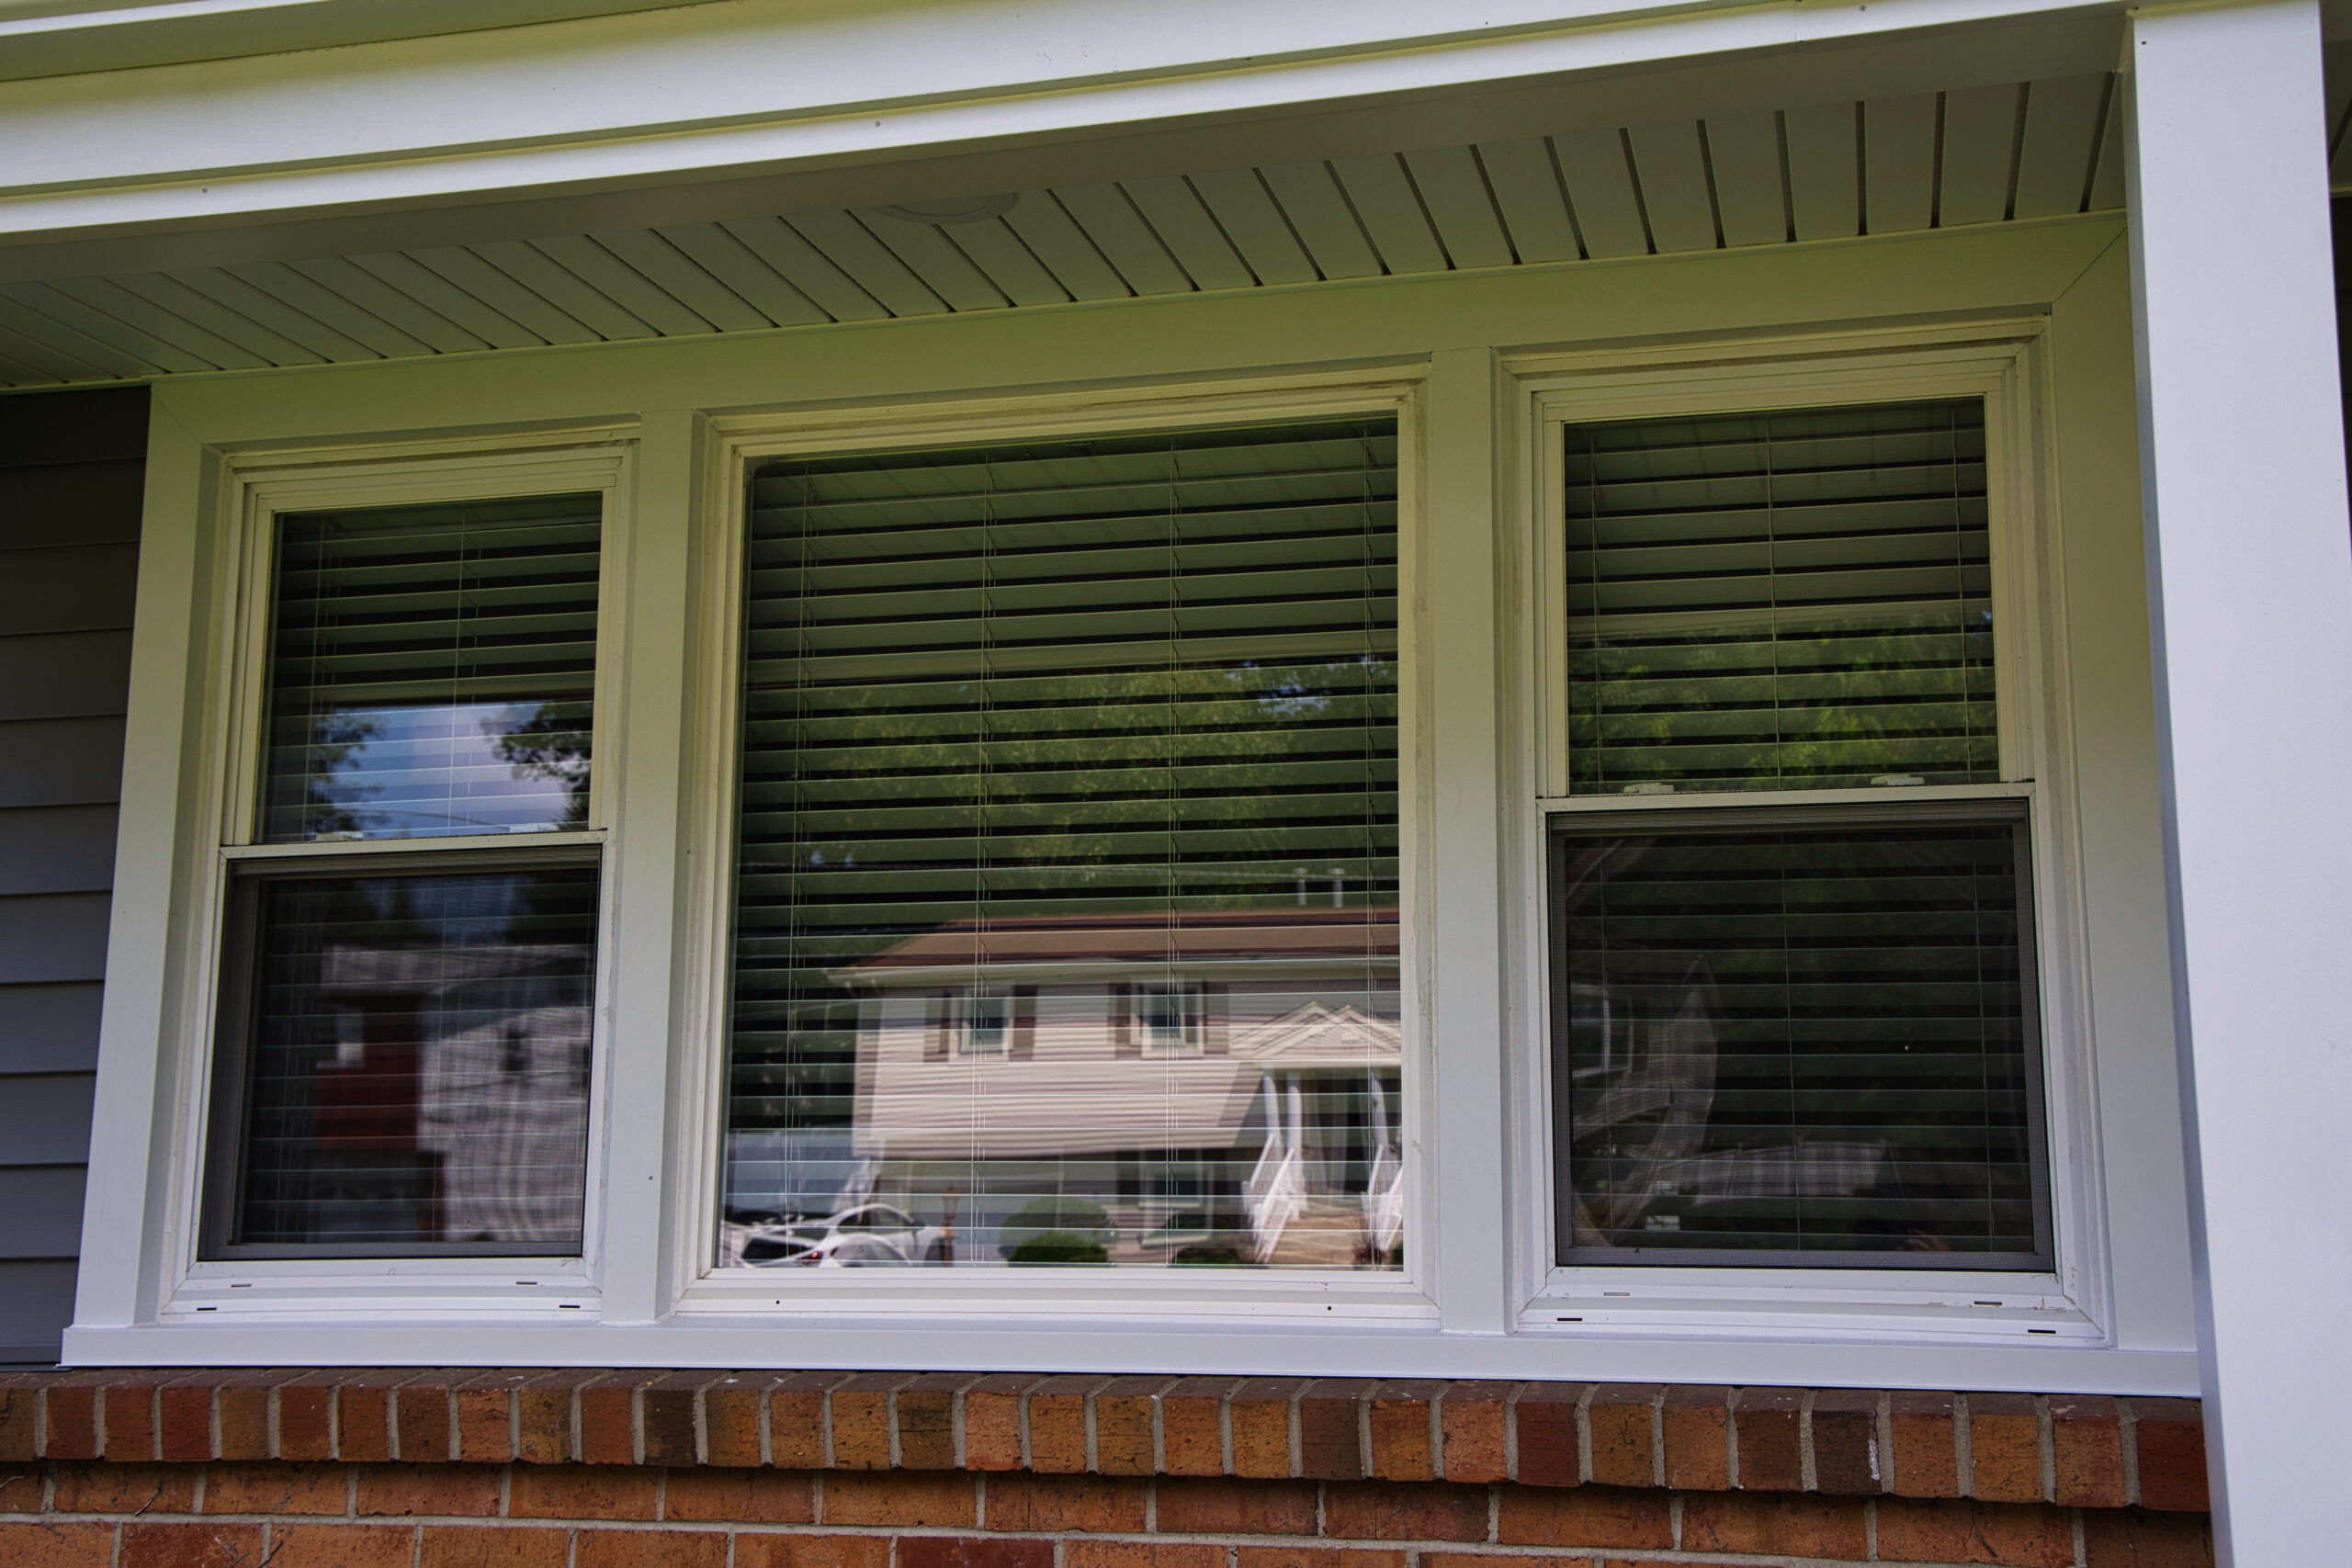 A window with blinds on the side of the house.